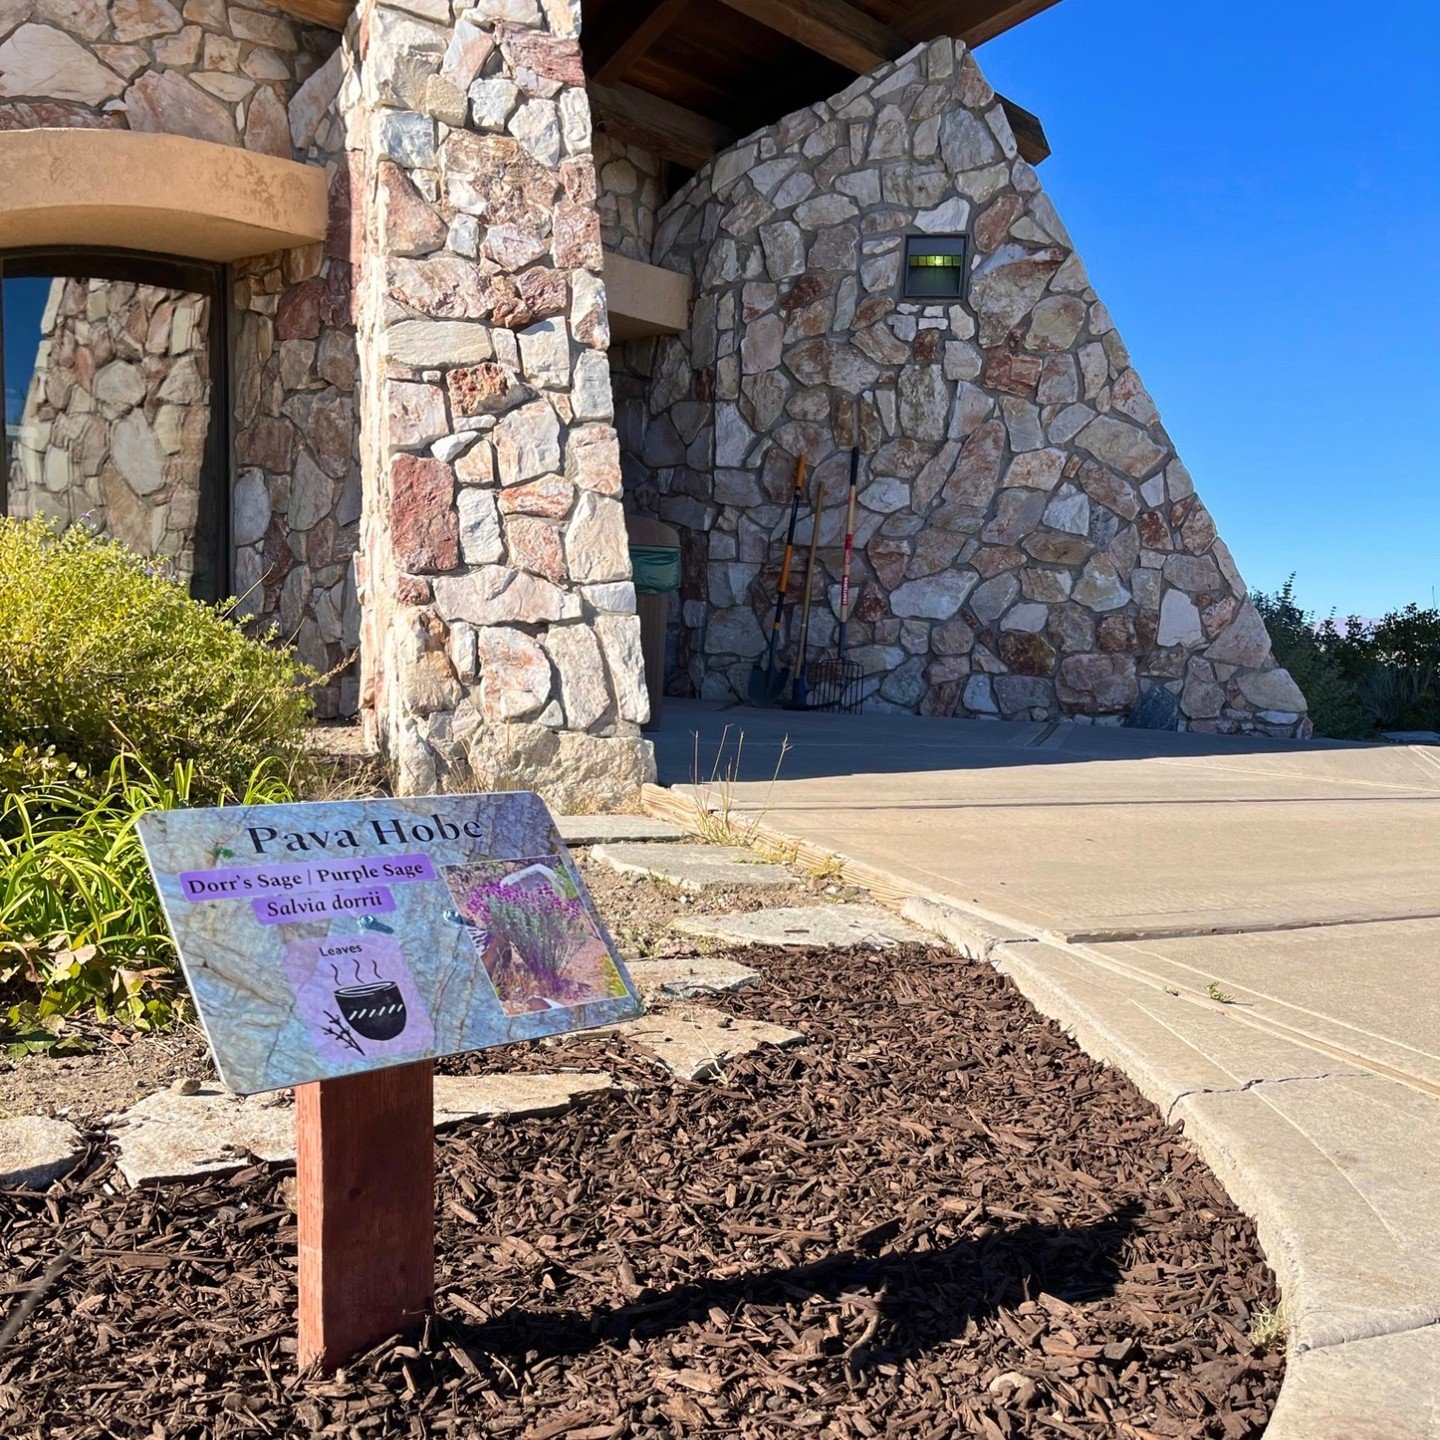 This installation is one of three native plant gardens that will be installed at the Pyramid Lake Museum. 🌾

The first garden, installed in May 2022, showcases a Mountain theme of plants native to northern Nevada. Each plant comes with educational s